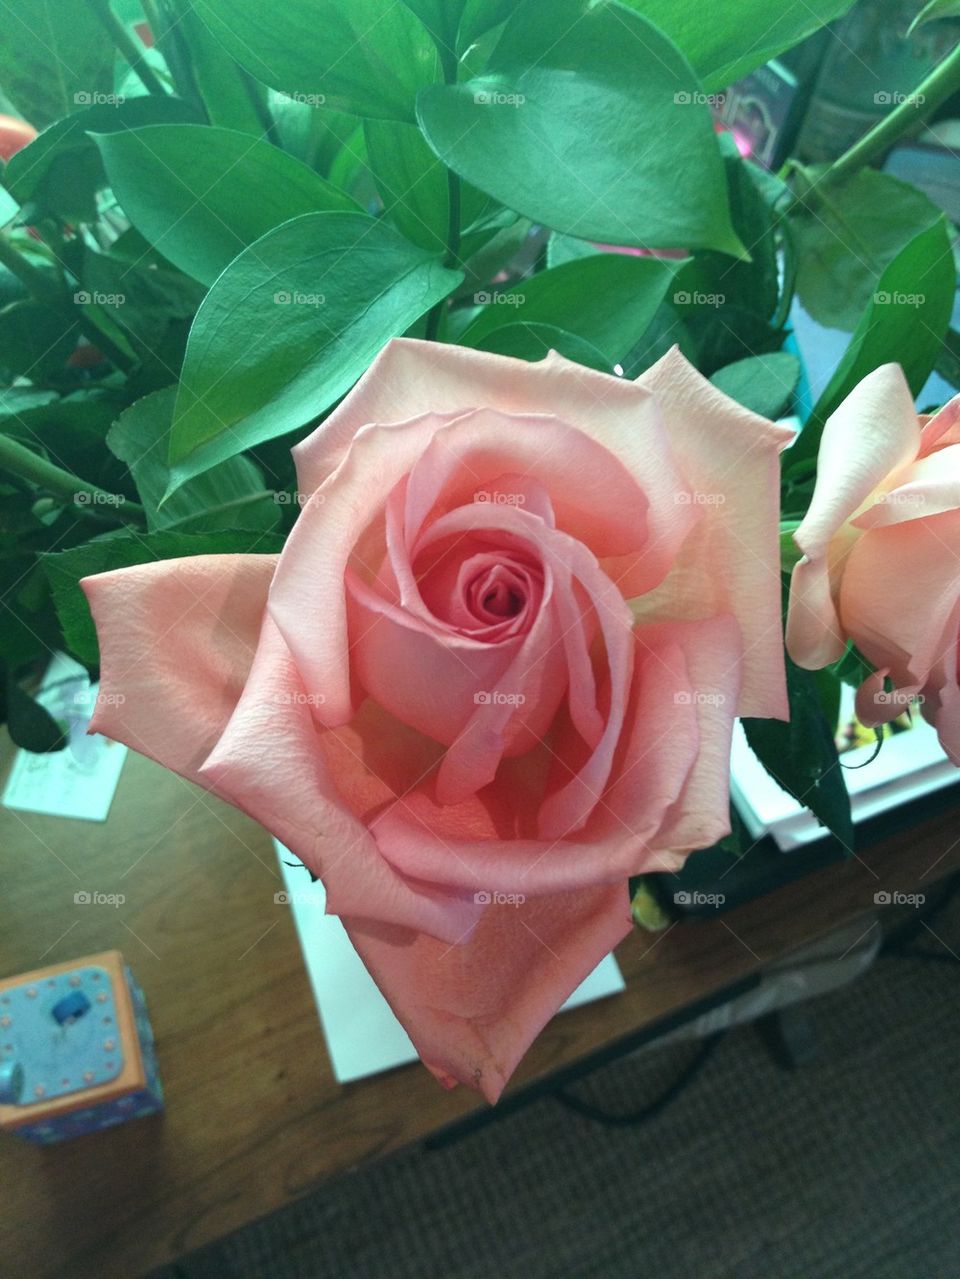 Roses are pink, I love you, I'm sending you a rose, what do you think?